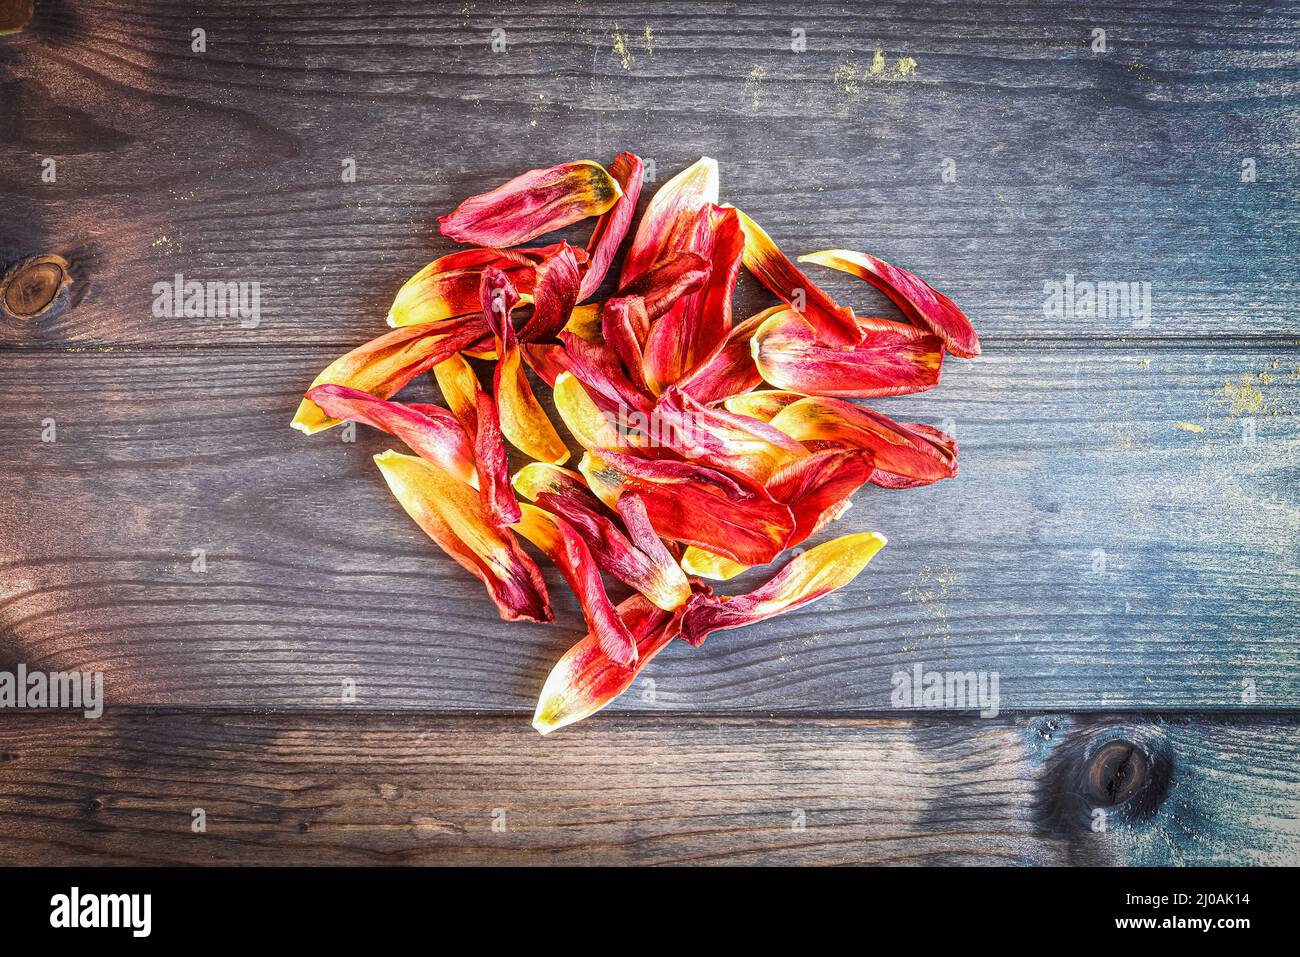 A bunch of tulip petals on a wooden surface, floral background. Stock Photo